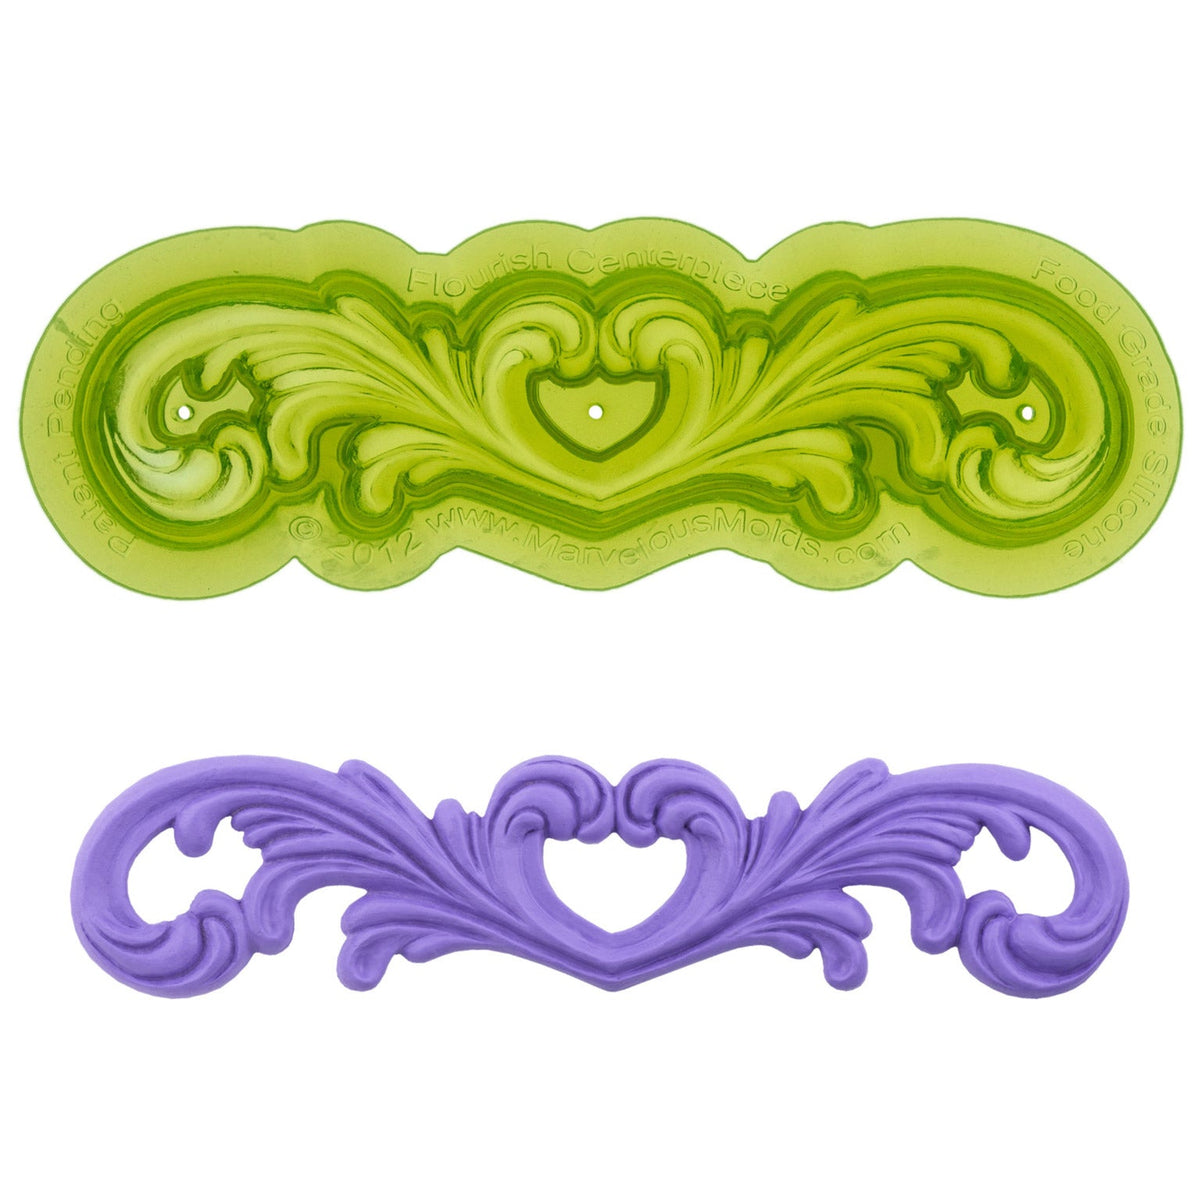 Flourish Centerpiece Scroll Food Safe Silicone Mold for Fondant Cake Decorating by Marvelous Molds